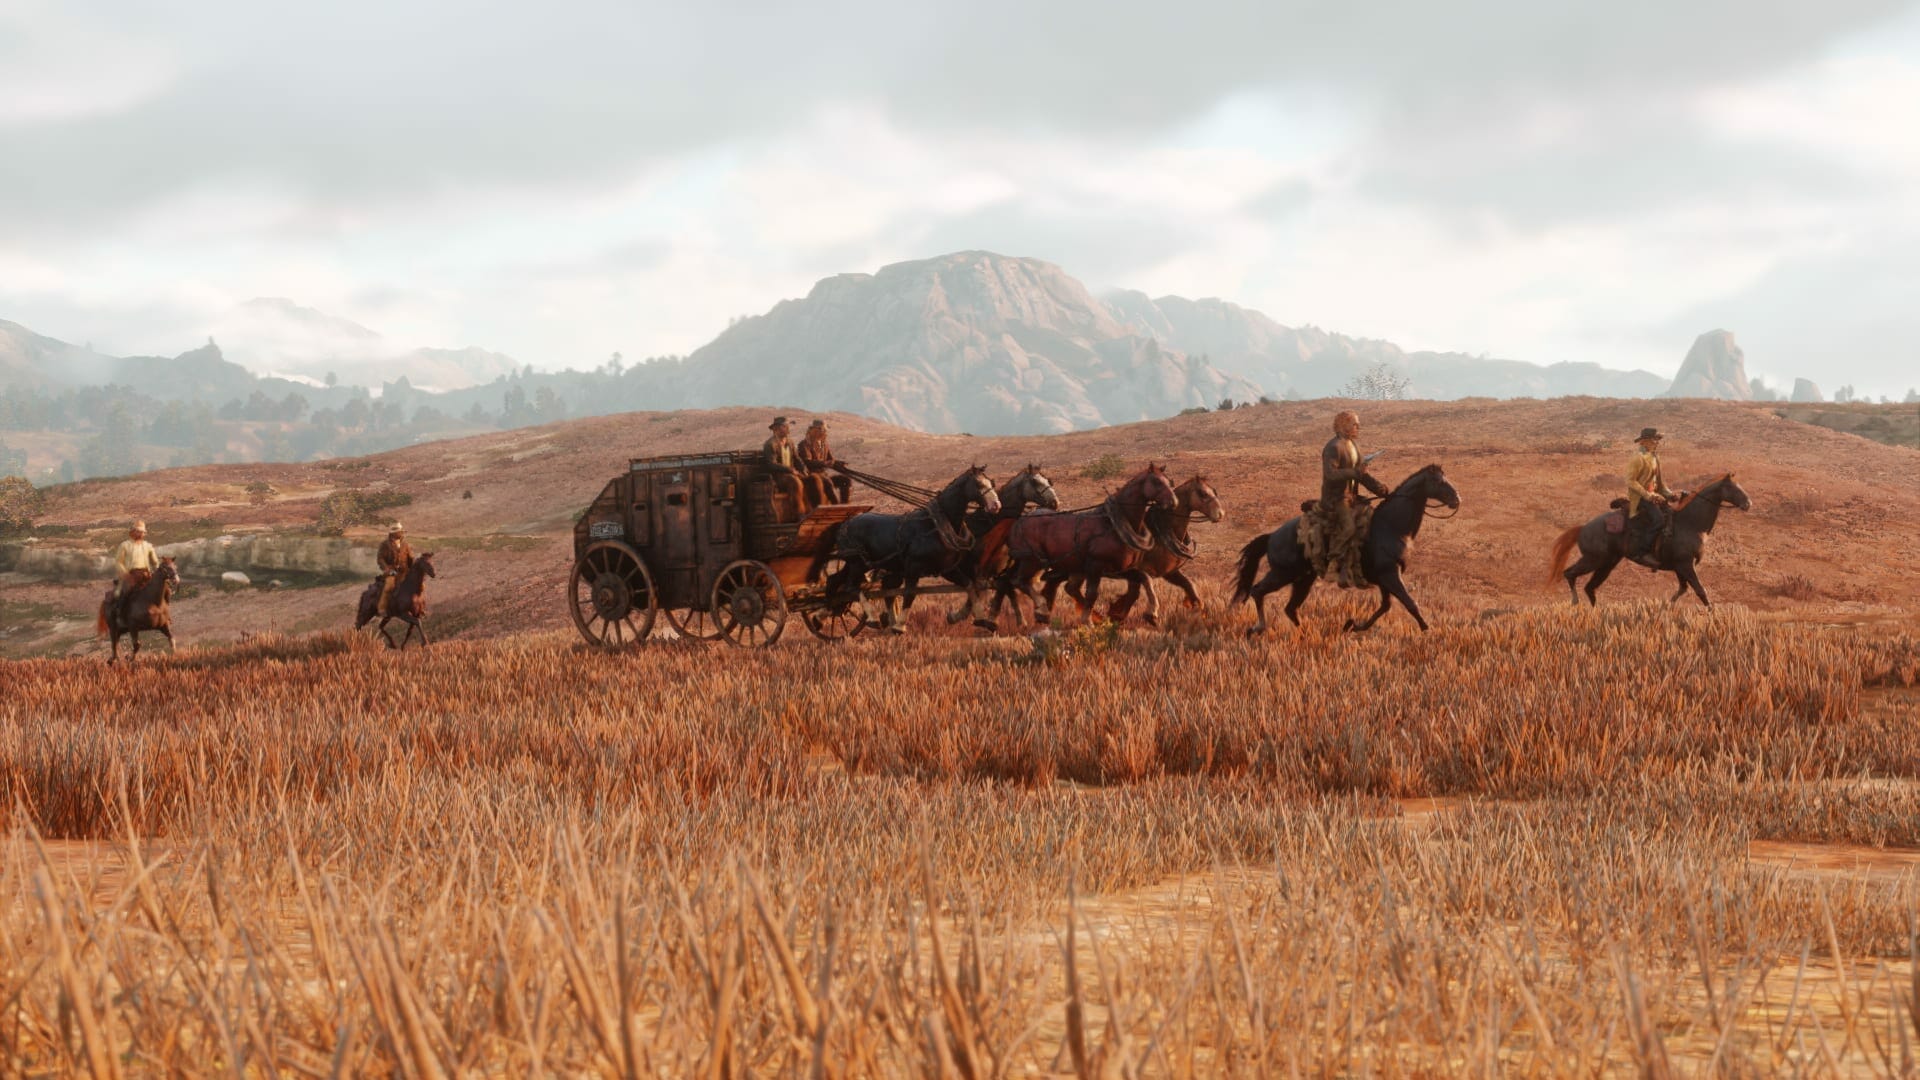 Red Dead Redemption 2 on 2 Discs Confirmed – Install Disc & Play Disc For Physical Version